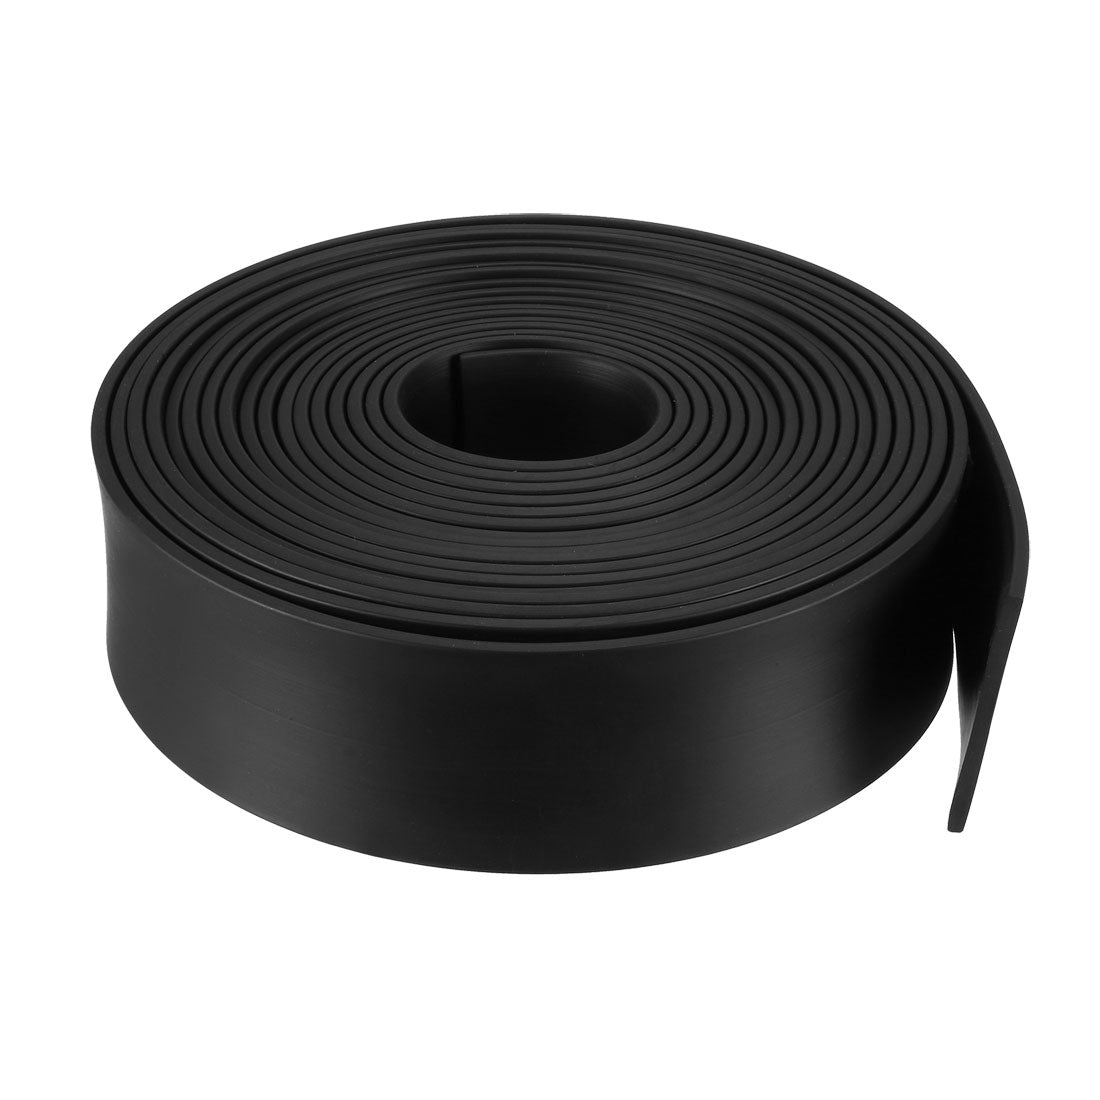 uxcell Uxcell Solid Rectangle Rubber Seal Strip 15mm Wide 5mm Thick, 5 Meters Long Black